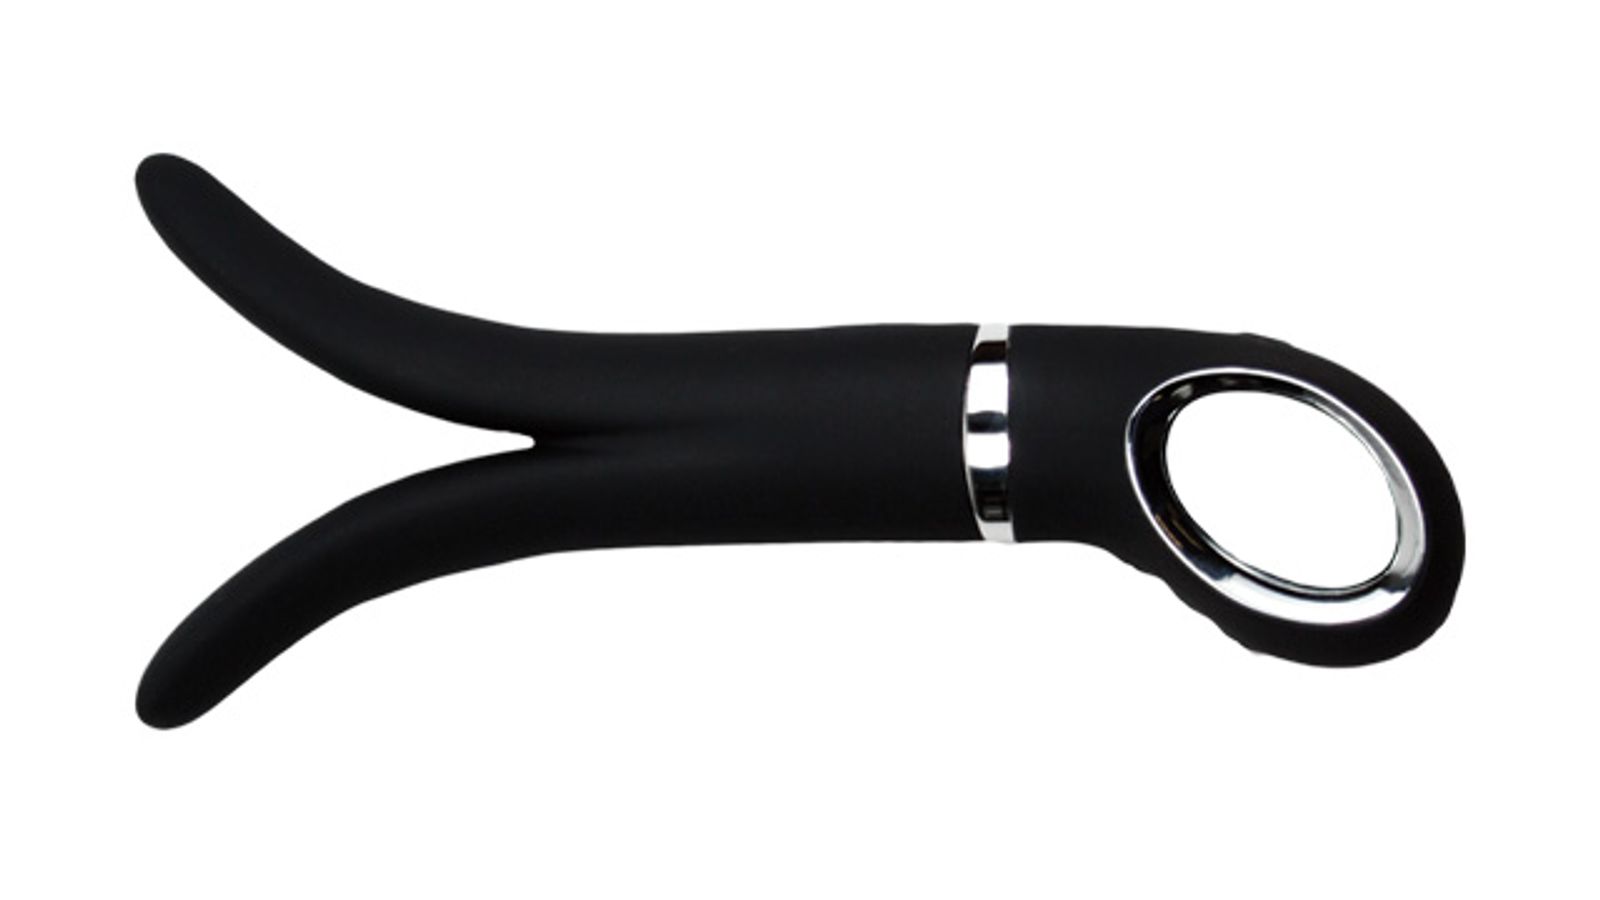 Entrenue Now Shipping Limited Edition G-Vibe Noir With Enhanced Features